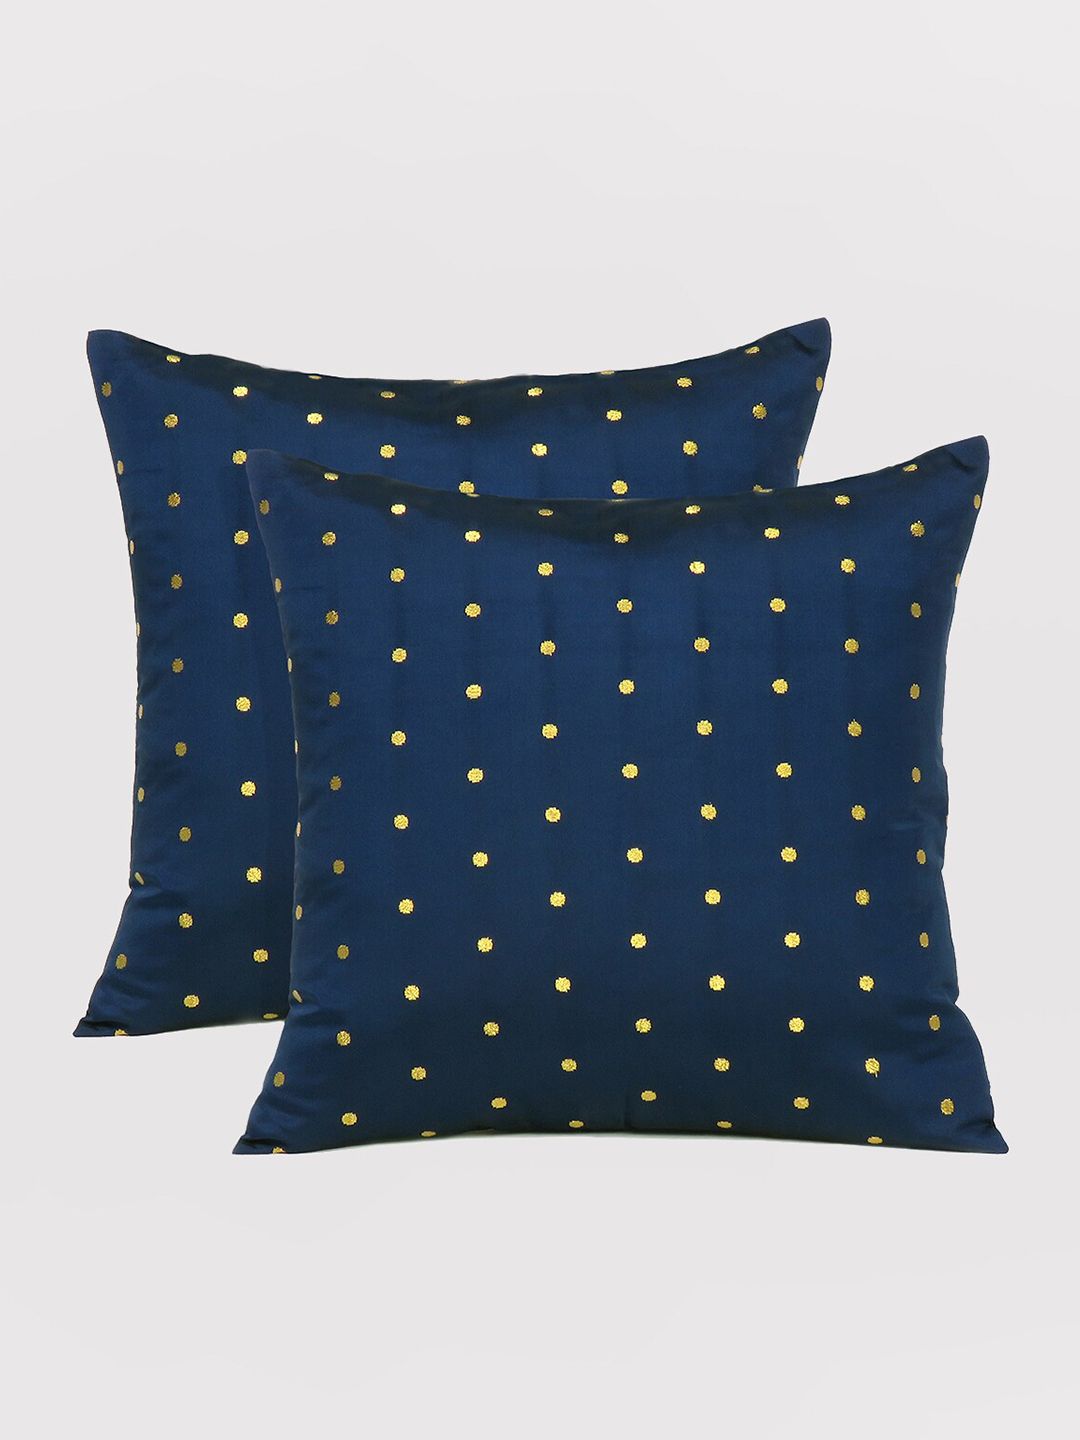 OUSSUM Navy Blue & Gold-Toned Set of 2 Geometric Square Cushion Covers Price in India